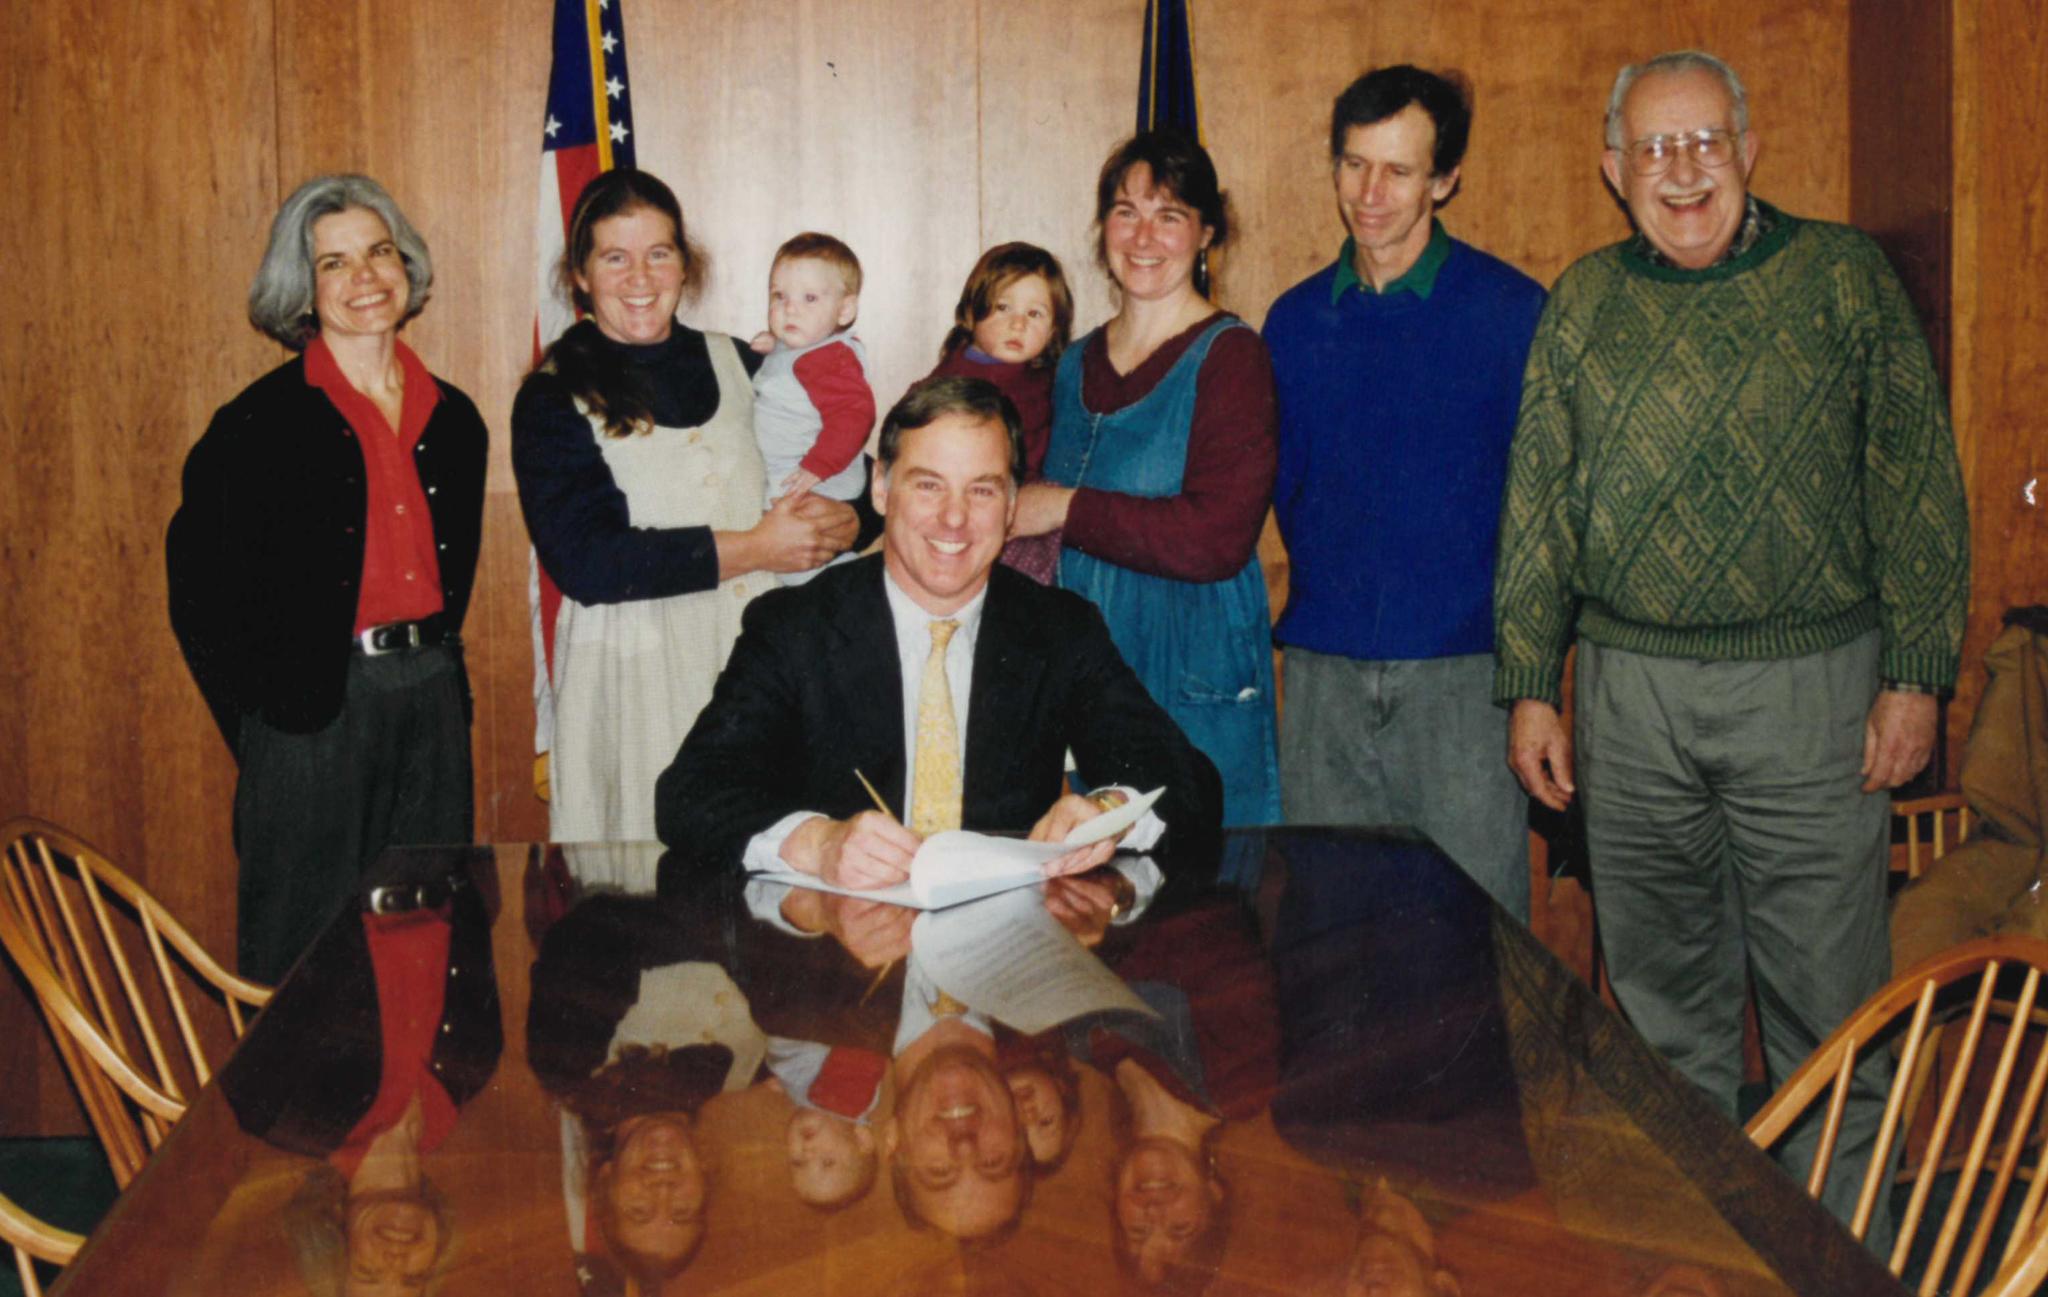 A group of five people (including former NOFA-VT Executive Director Enid Wonnacott and current NOFA-VT Director of Finance Kirsten Bower, both holding babies on their hips) stand behind former Vermont governor Howard Dean. Everyone is smiling at the camera, including Governor Dean, who is also poised to sign some papers.  